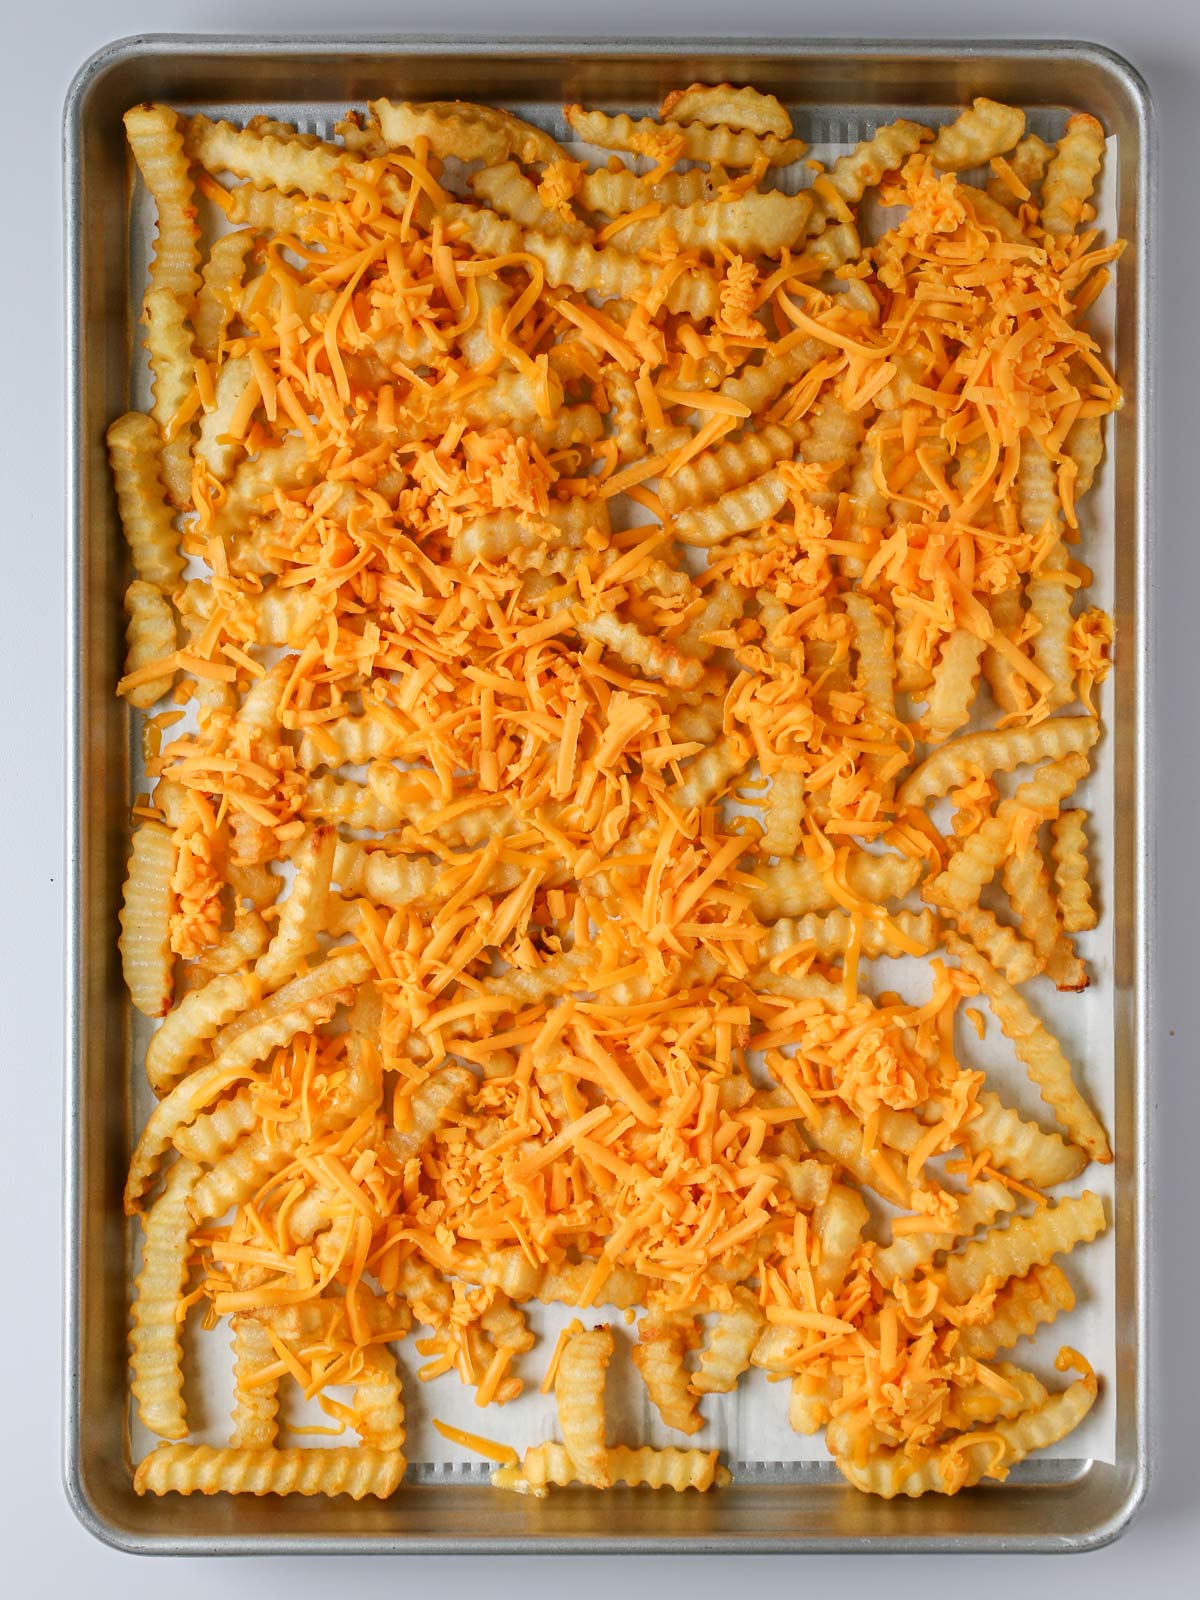 cheese sprinkled on fries in baking sheet.